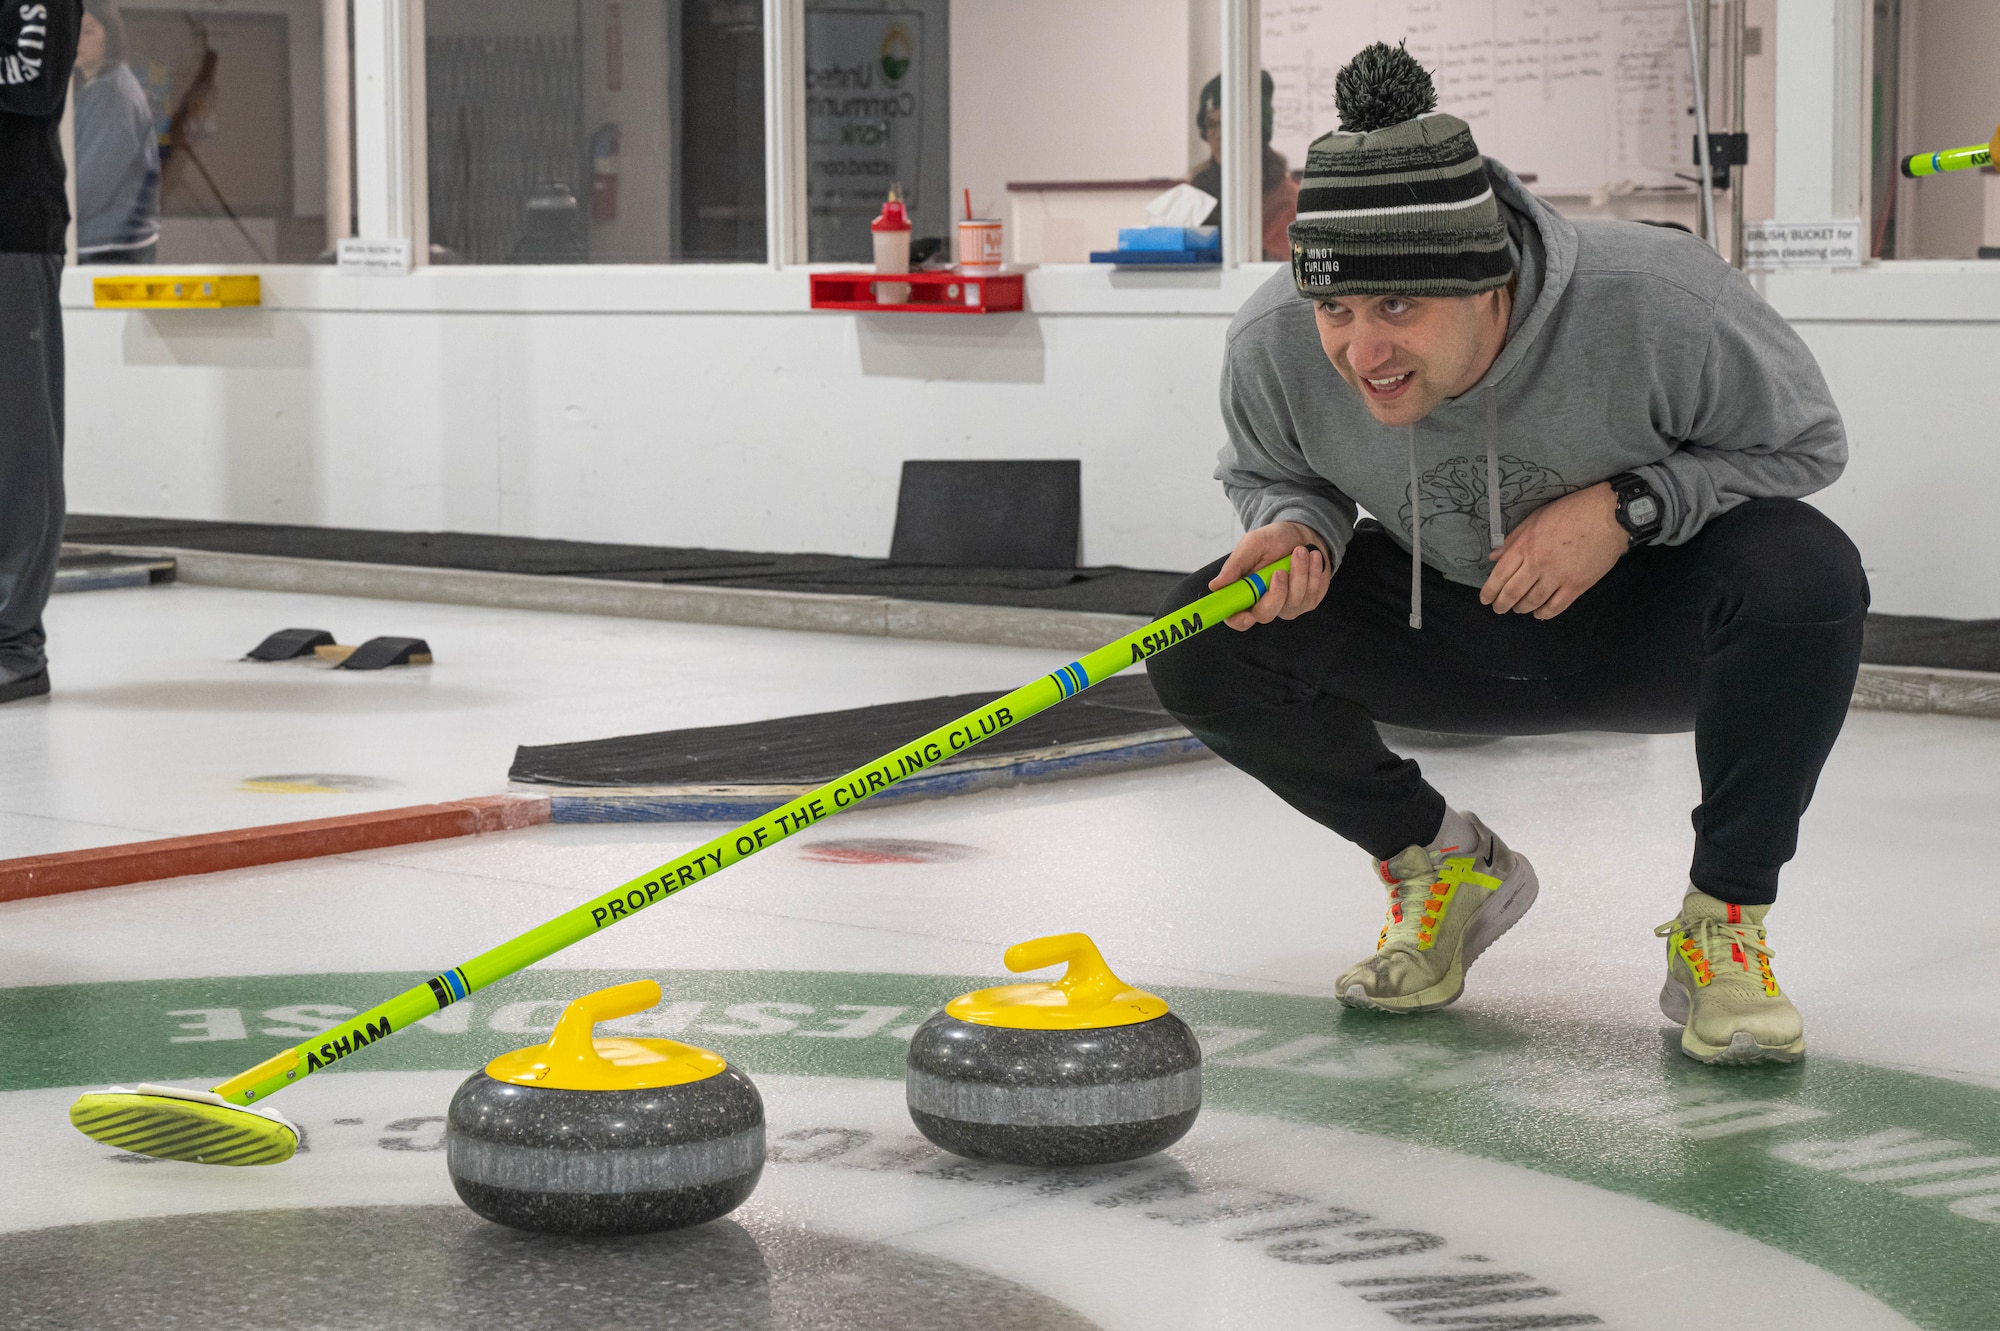 U.S. Air Force 1st Lt. Graysen Trandem, 740th Missile Squadron assistant flight commander, performs skip duties for his team at the Minot Curling Club, Minot, North Dakota, March 19, 2024. As the skip, Trandem stood in the target area and communicated to his teammates where they should aim the delivery of the curling stone. (U.S. Air Force photo by Airman 1st Class Kyle Wilson)